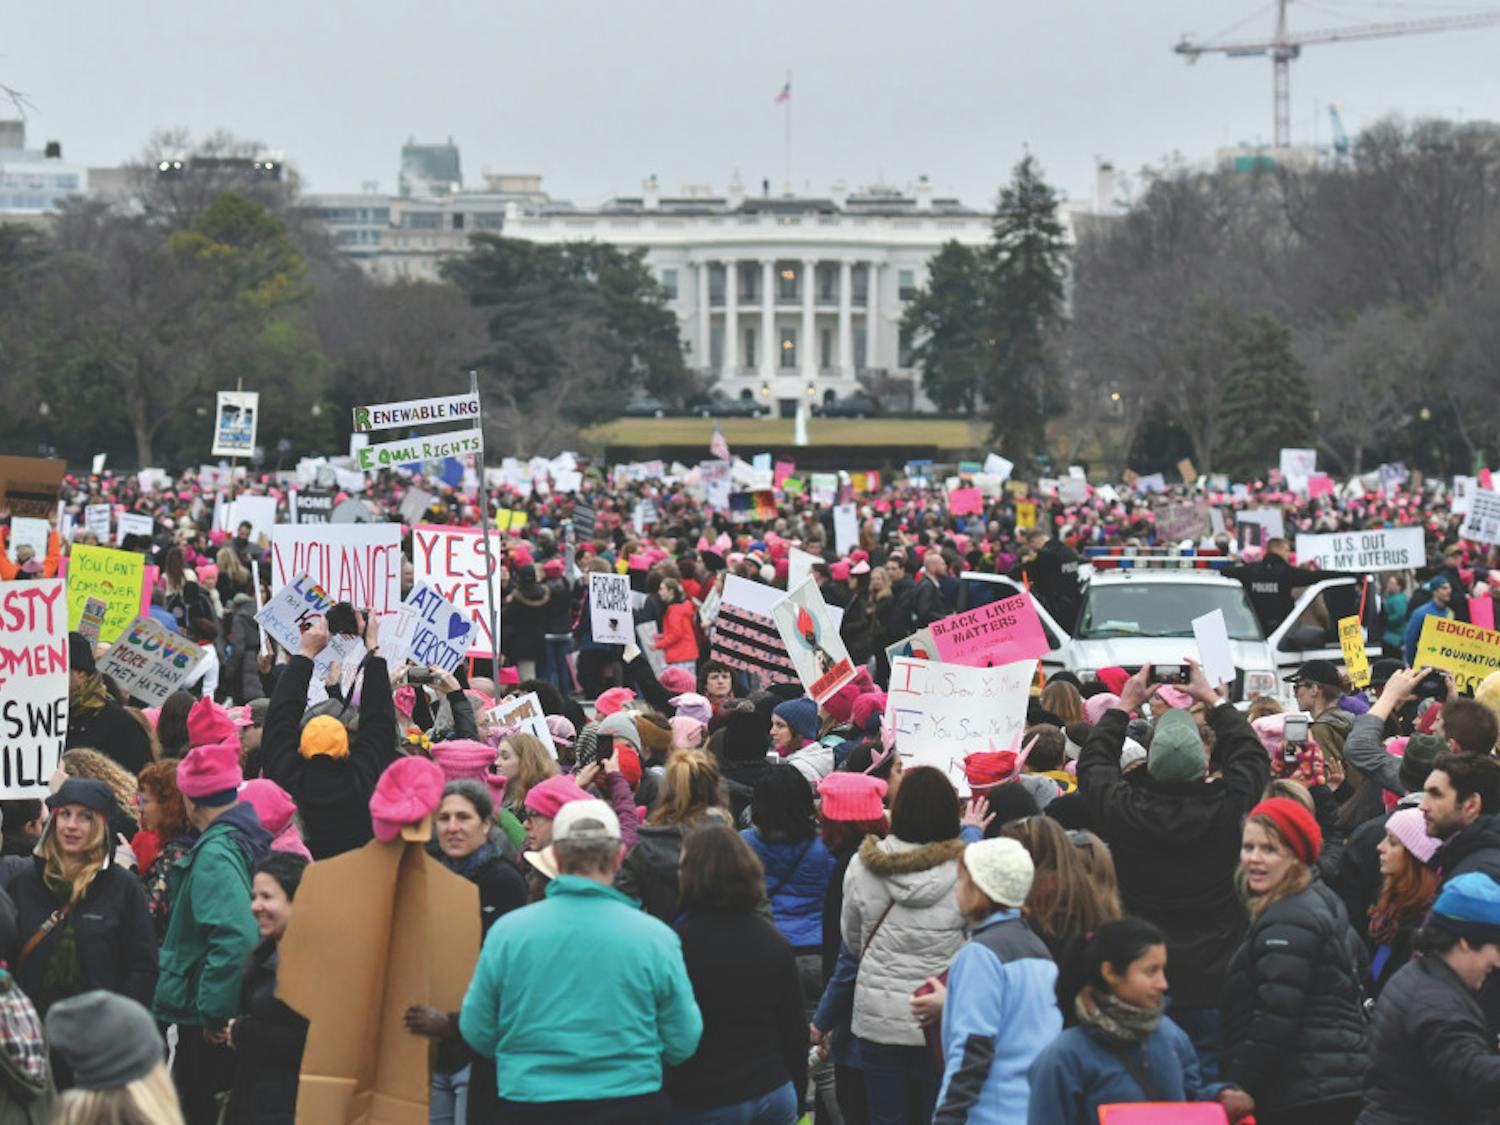 Thousands gather on the Ellipse near the back lawn of the White House at the conclusion of the Women’s March on Washington. Many of the marchers placed their posters along a few small fences to create “walls” near the White House.